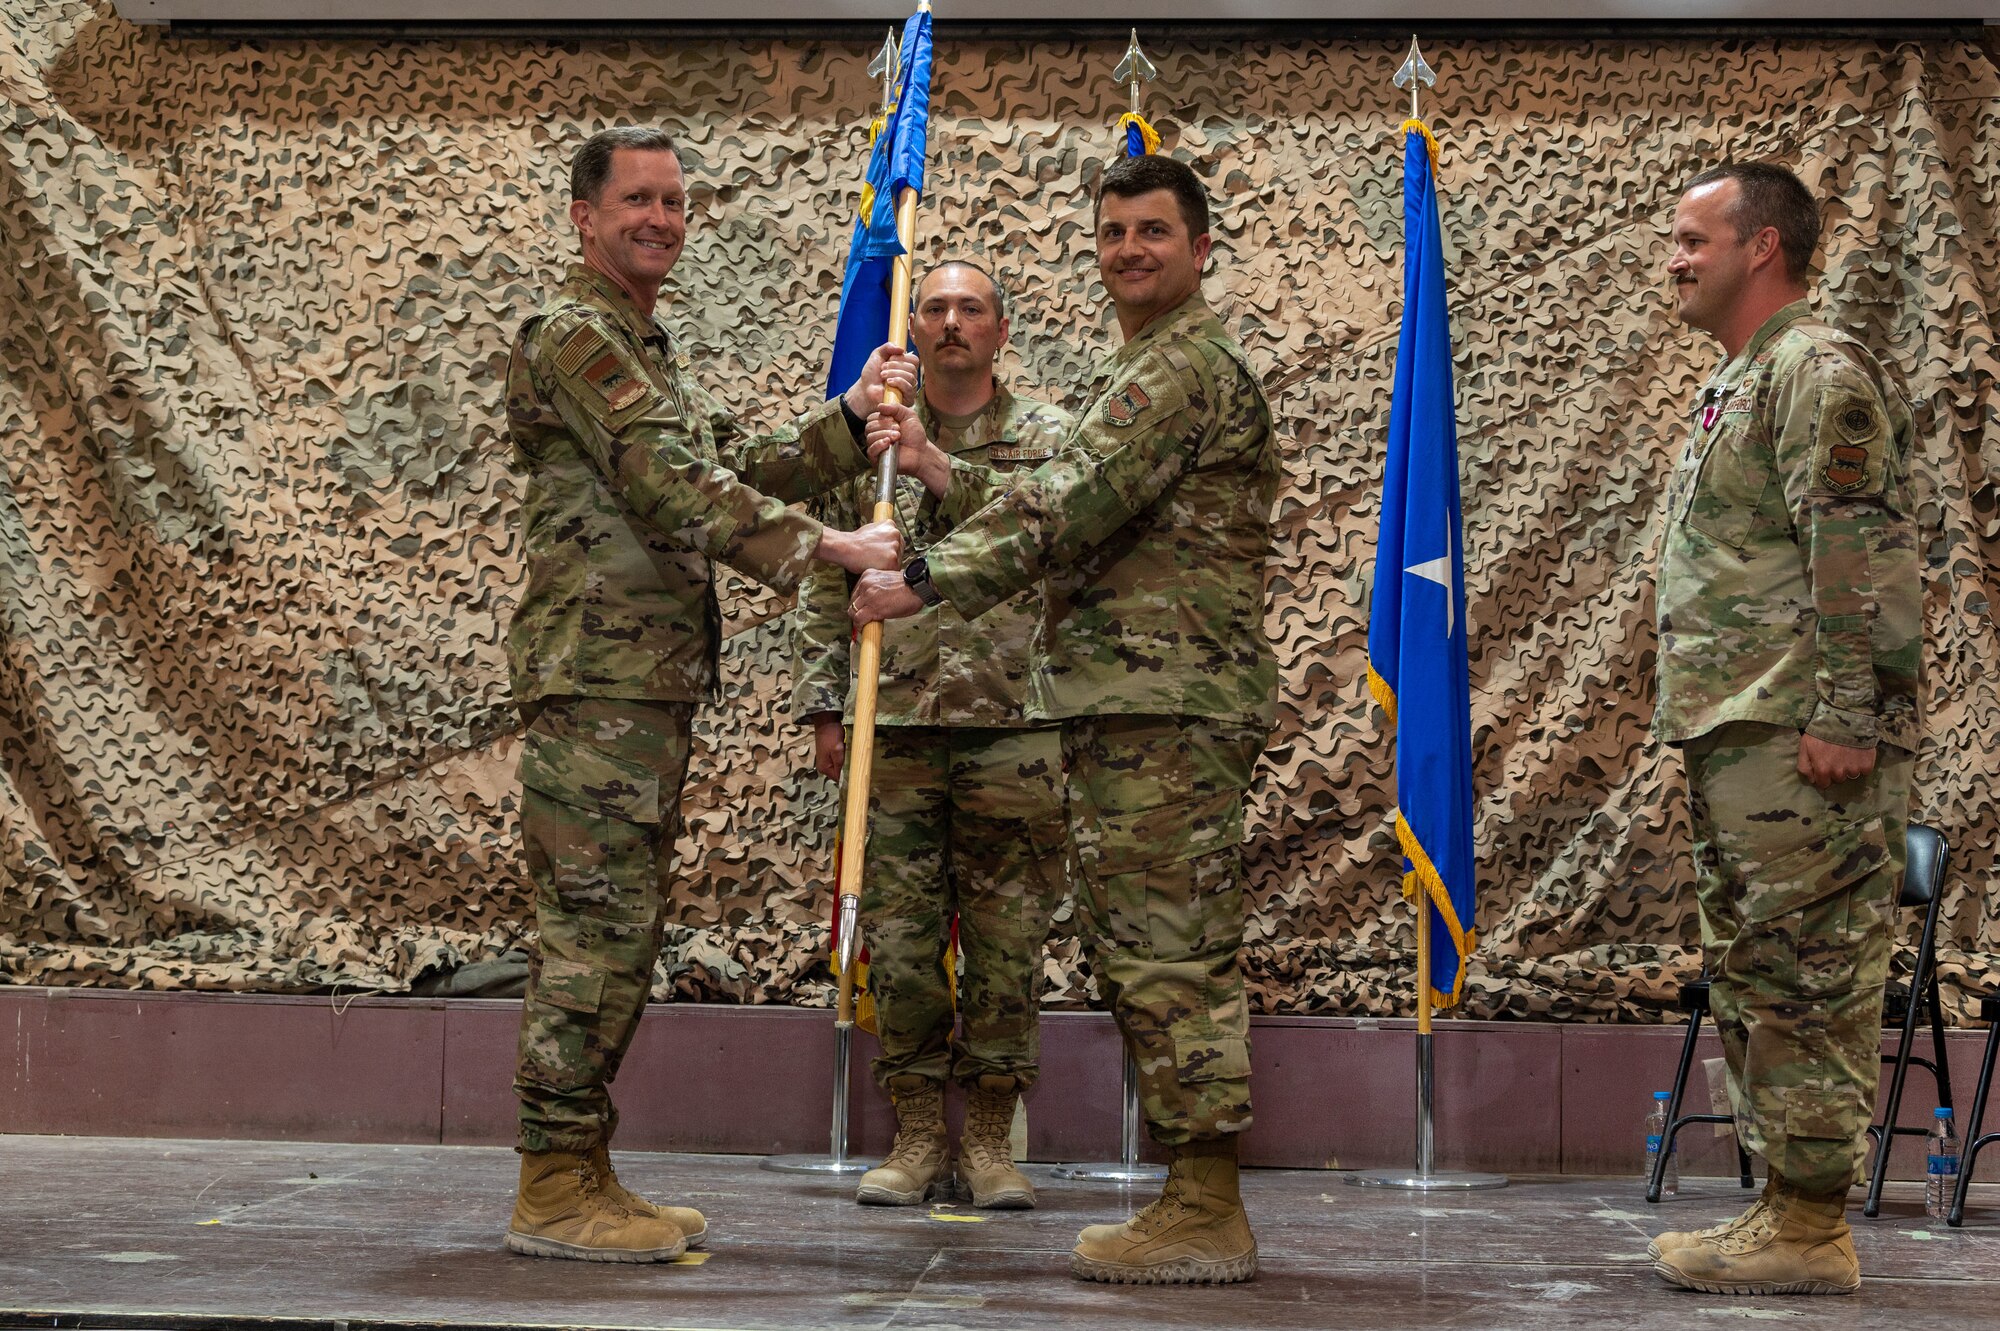 U.S. Air Force Brig. Gen. Christopher Sage, 332d Air Expeditionary Wing commander, exchanges the 332d Expeditionary Operations Support Squadron guidon with U.S. Air Force Lt. Col. James A. Harris, 332d OSS incoming commander, during a change of command ceremony at an undisclosed location in Southwest Asia, June 4, 2022. A change of command ceremony is a tradition that represents a formal transfer of authority and responsibility from the outgoing commander to the incoming commander. (U.S. Air Force photo by Tech. Sgt. Lauren M. Snyder)